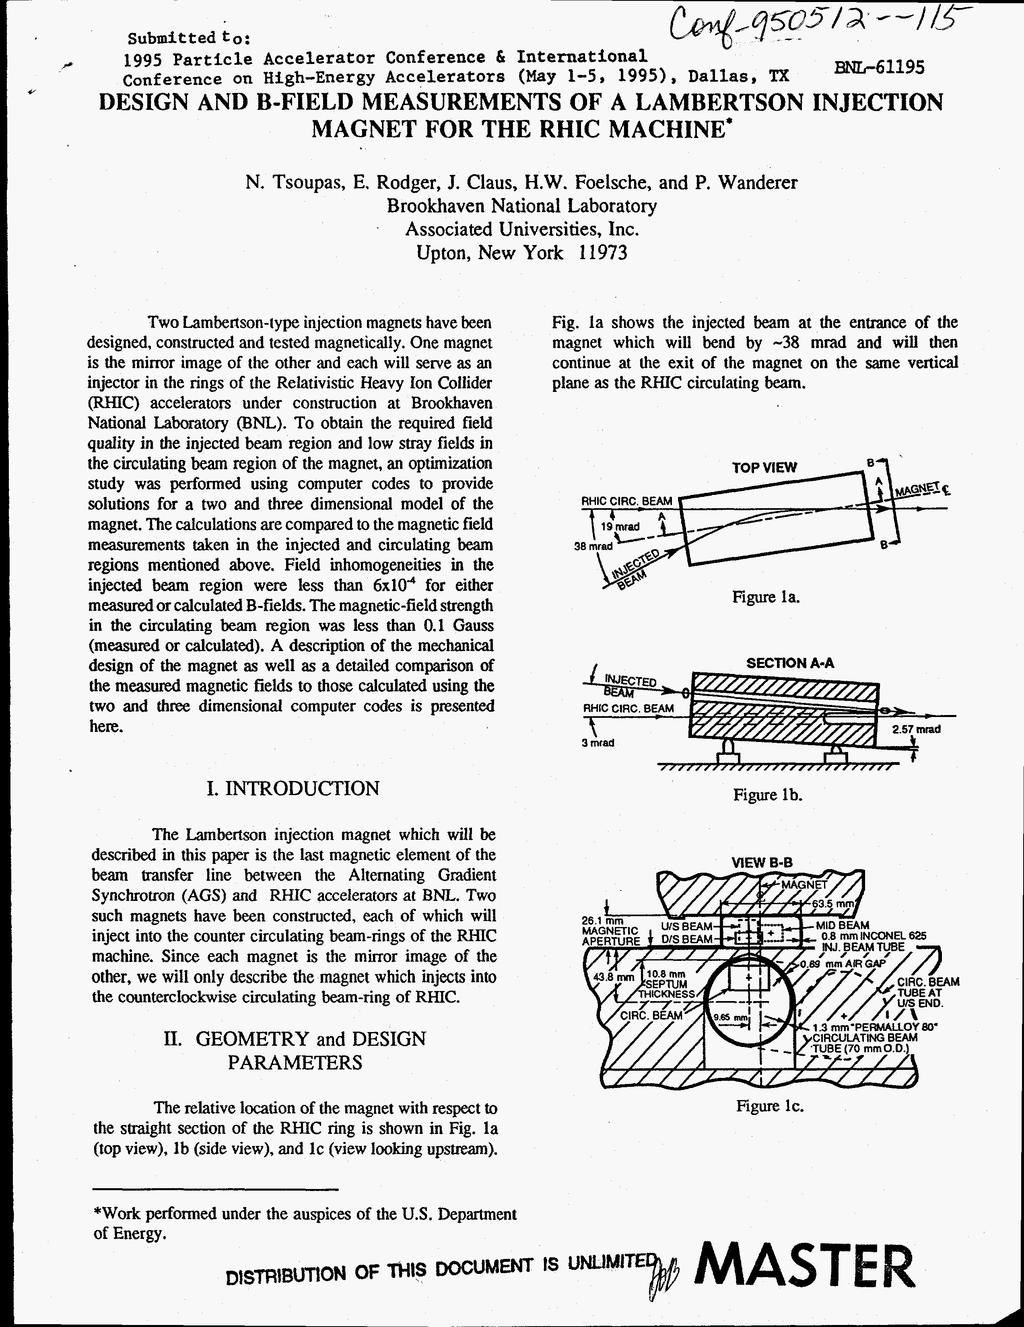 ,+ v Submitted t o : " 1995 Particle Accelerator Conference & International Conference on High-Energy Accelerators (May 1-5, 1995), Dallas, TX BNL-61195 DESIGN AND B-FIELD MEASUREMENTS OF A